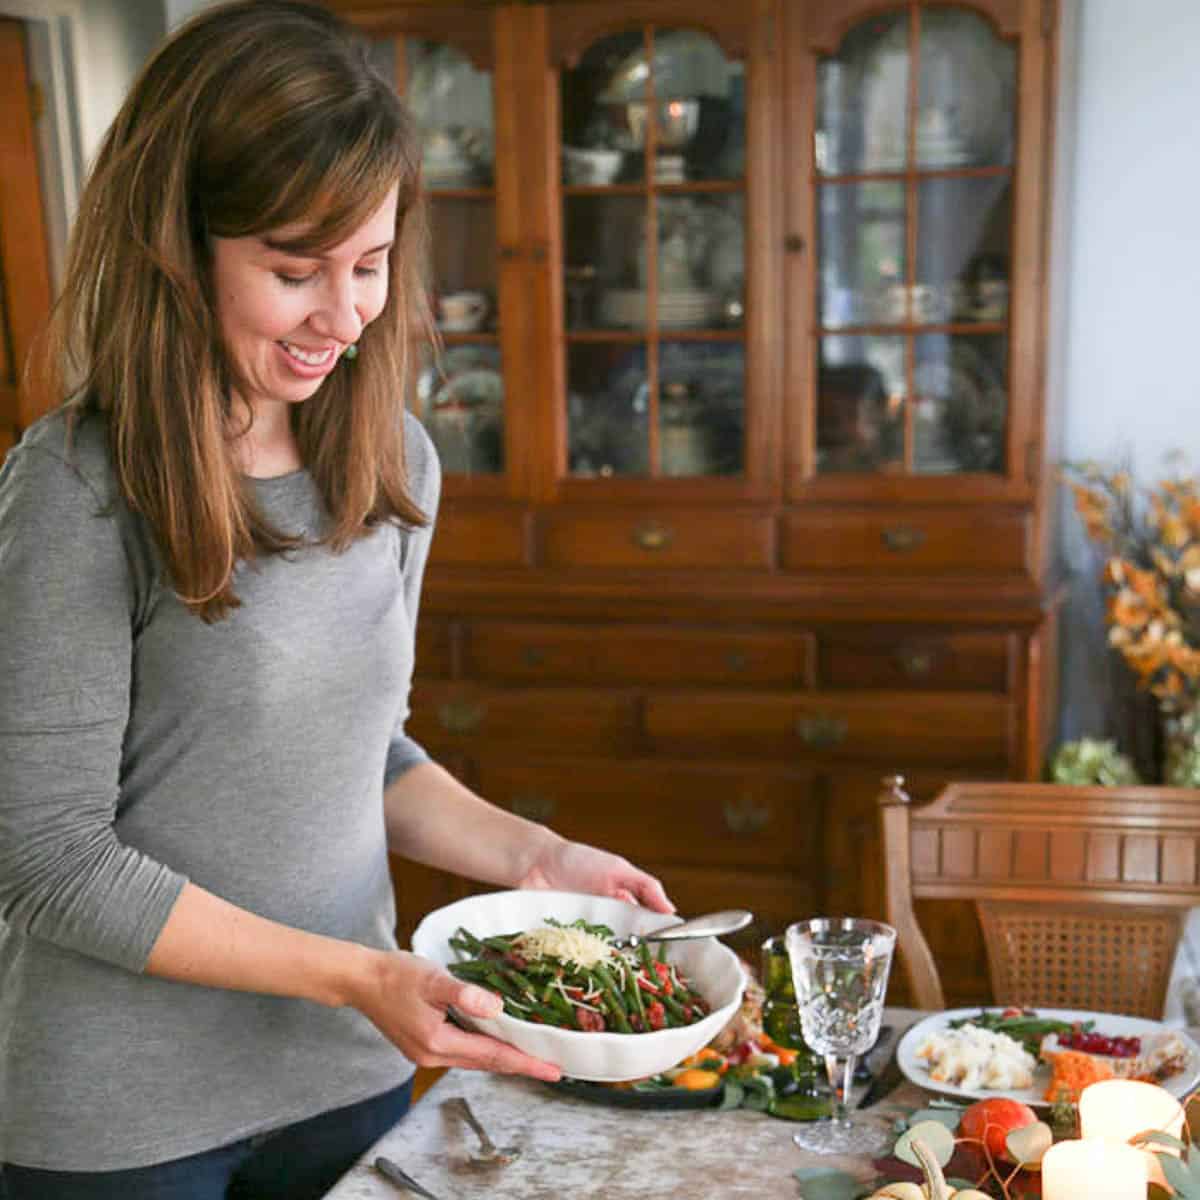 woman holding a bowl of green beans, about to set it on a dining table.